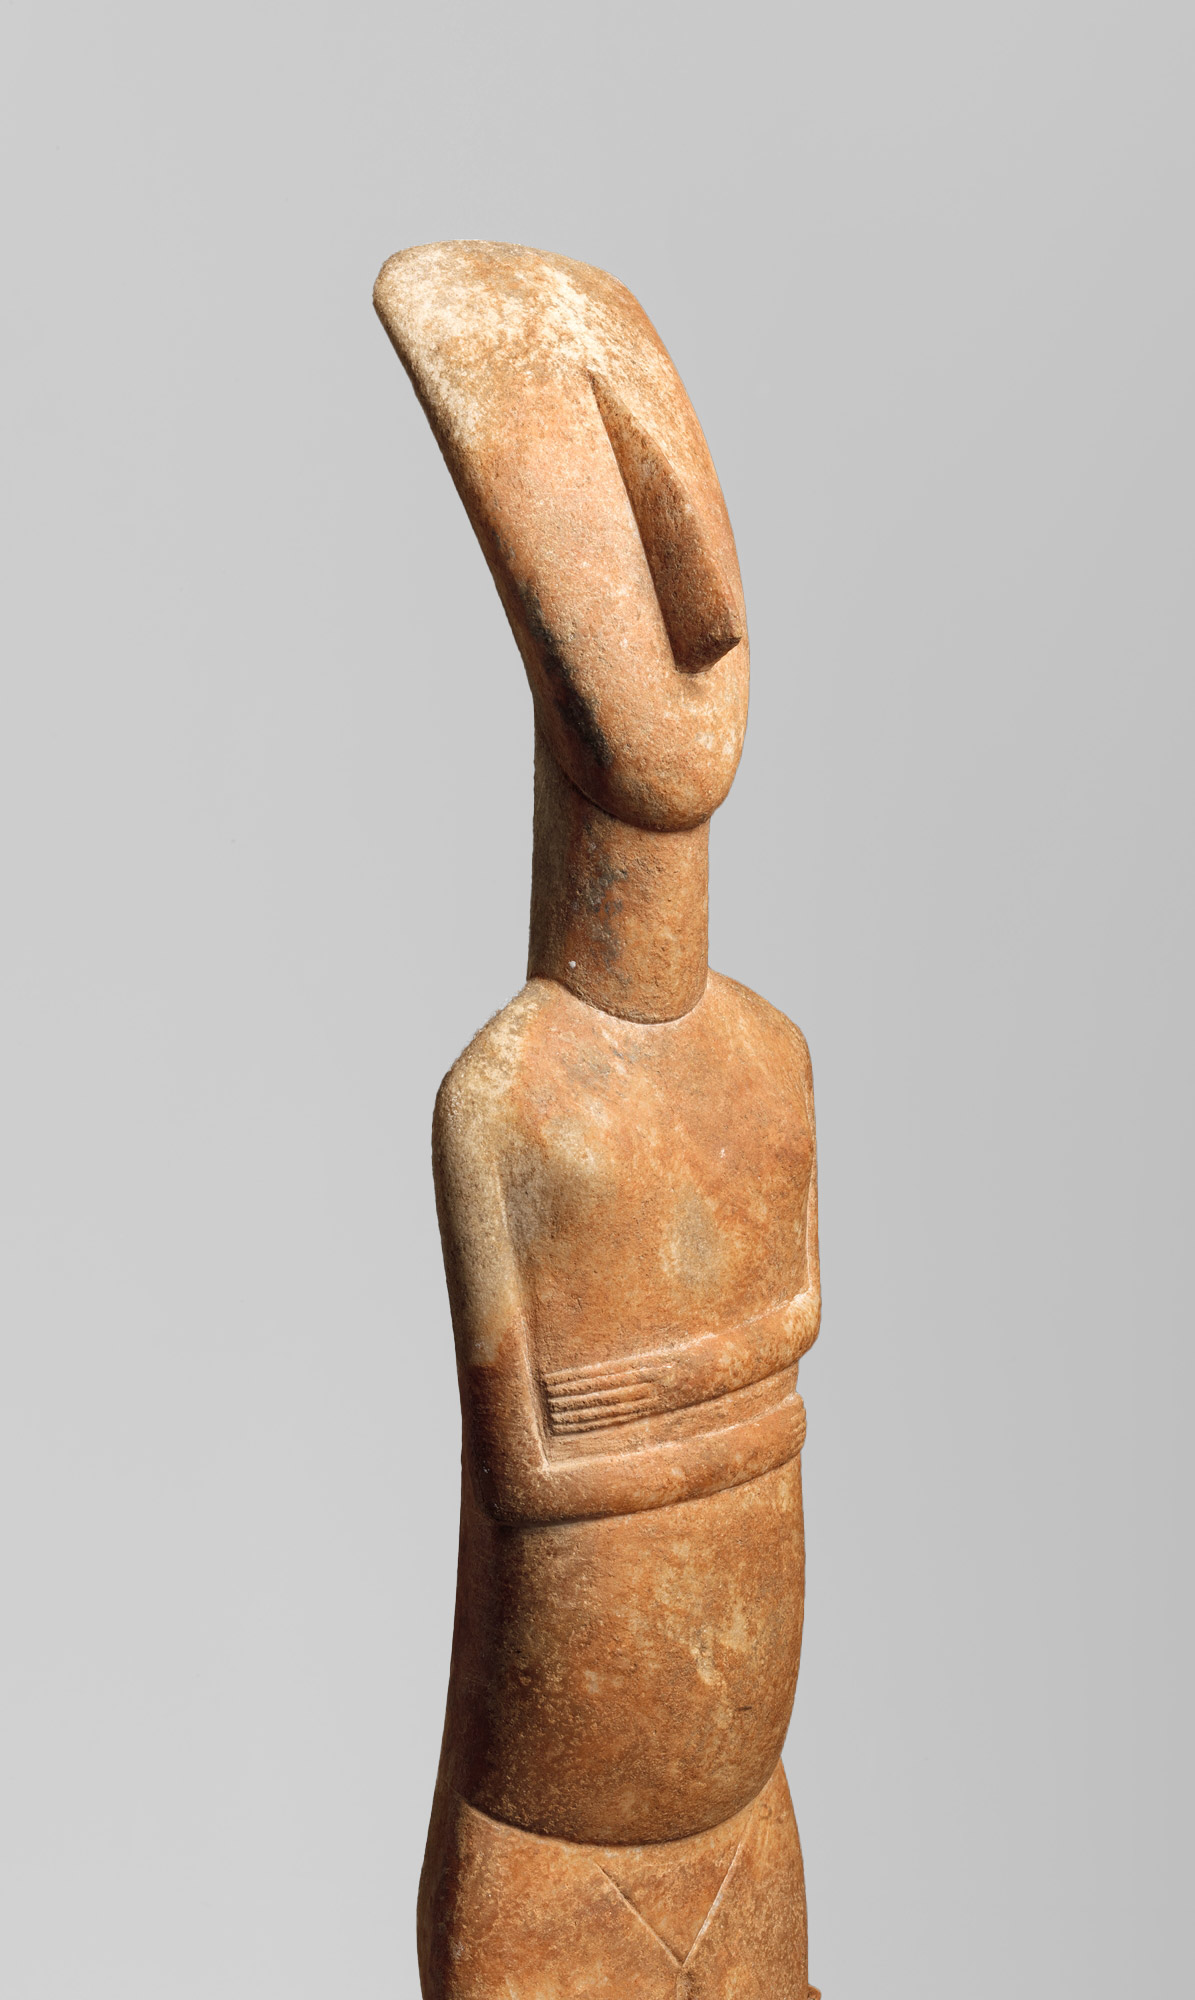 Marble female figure, Early Cycladic II, 2600–2400 BCE, Marble, 62.79 cm, The Metropolitan Museum of Art, New York, NY, USA and Public Domain